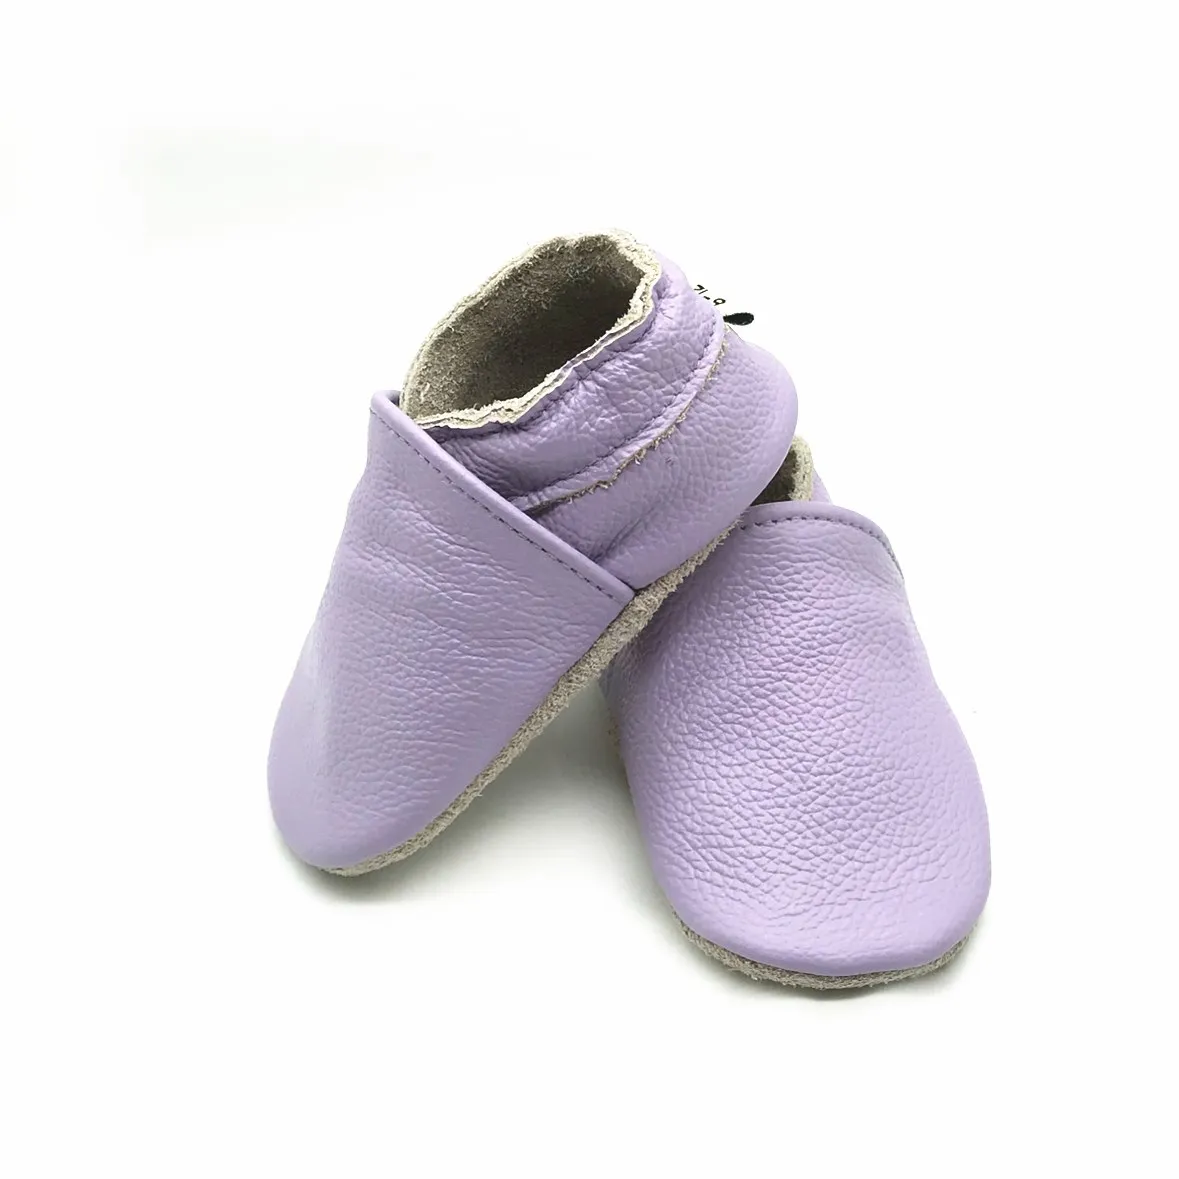 Newborn Baby Cowhide Shoes Solid Winter Warm Non-slip Toddler Infant Leather Walking Shoes